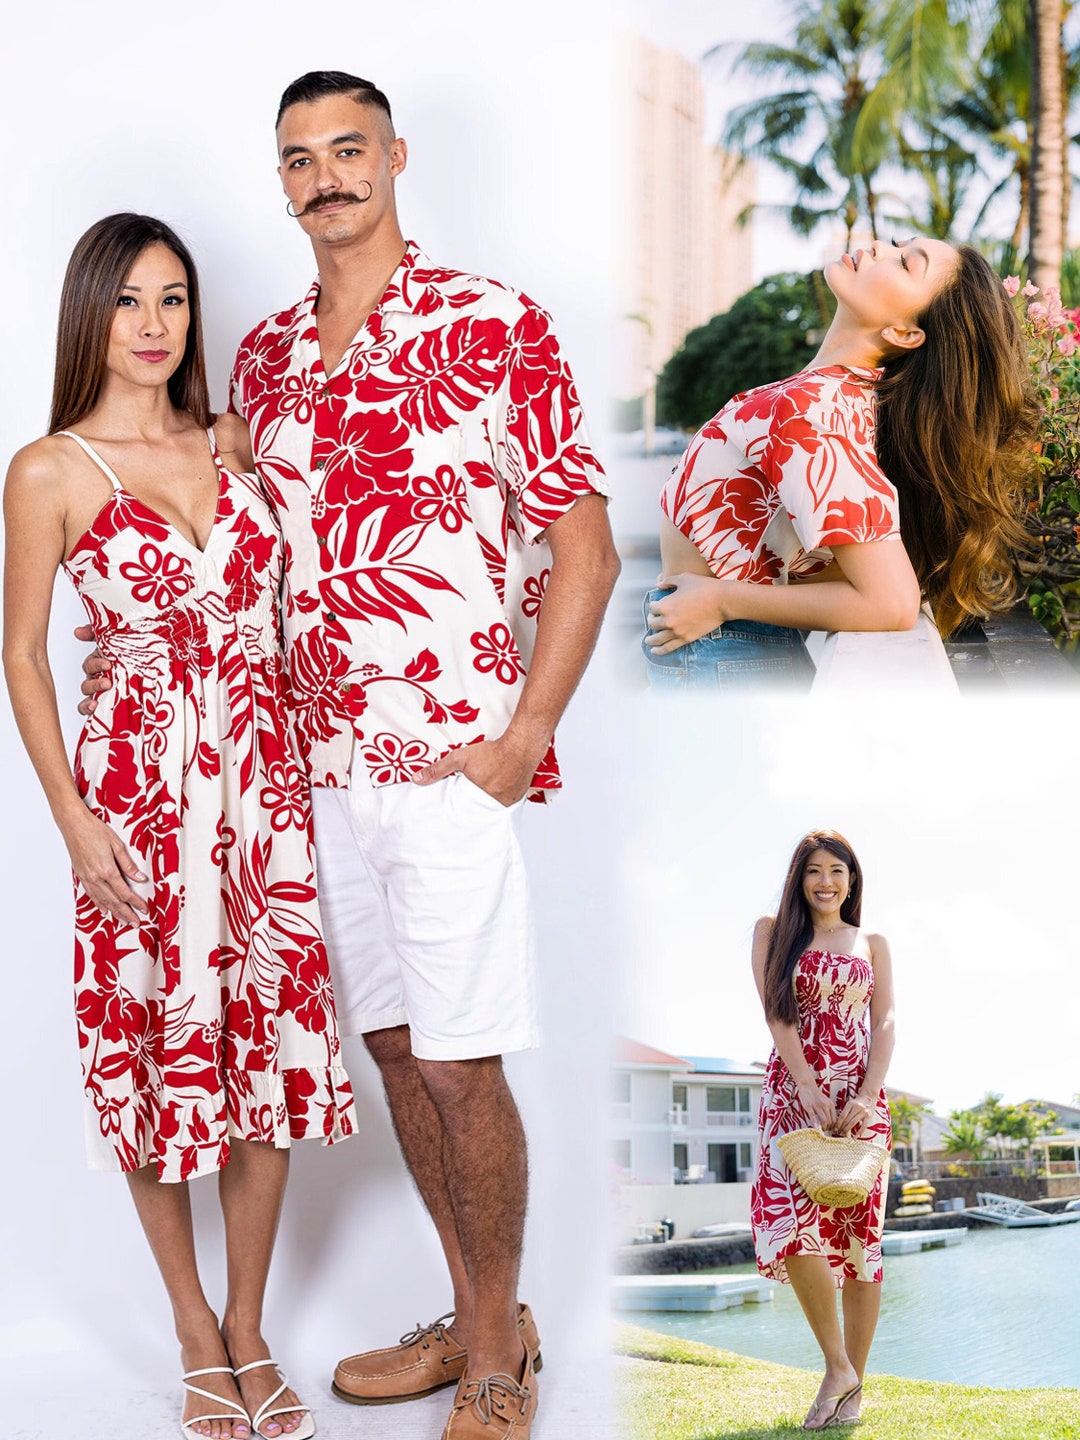 Family Matching Made in Hawaii Super Soft Resort Wear photo